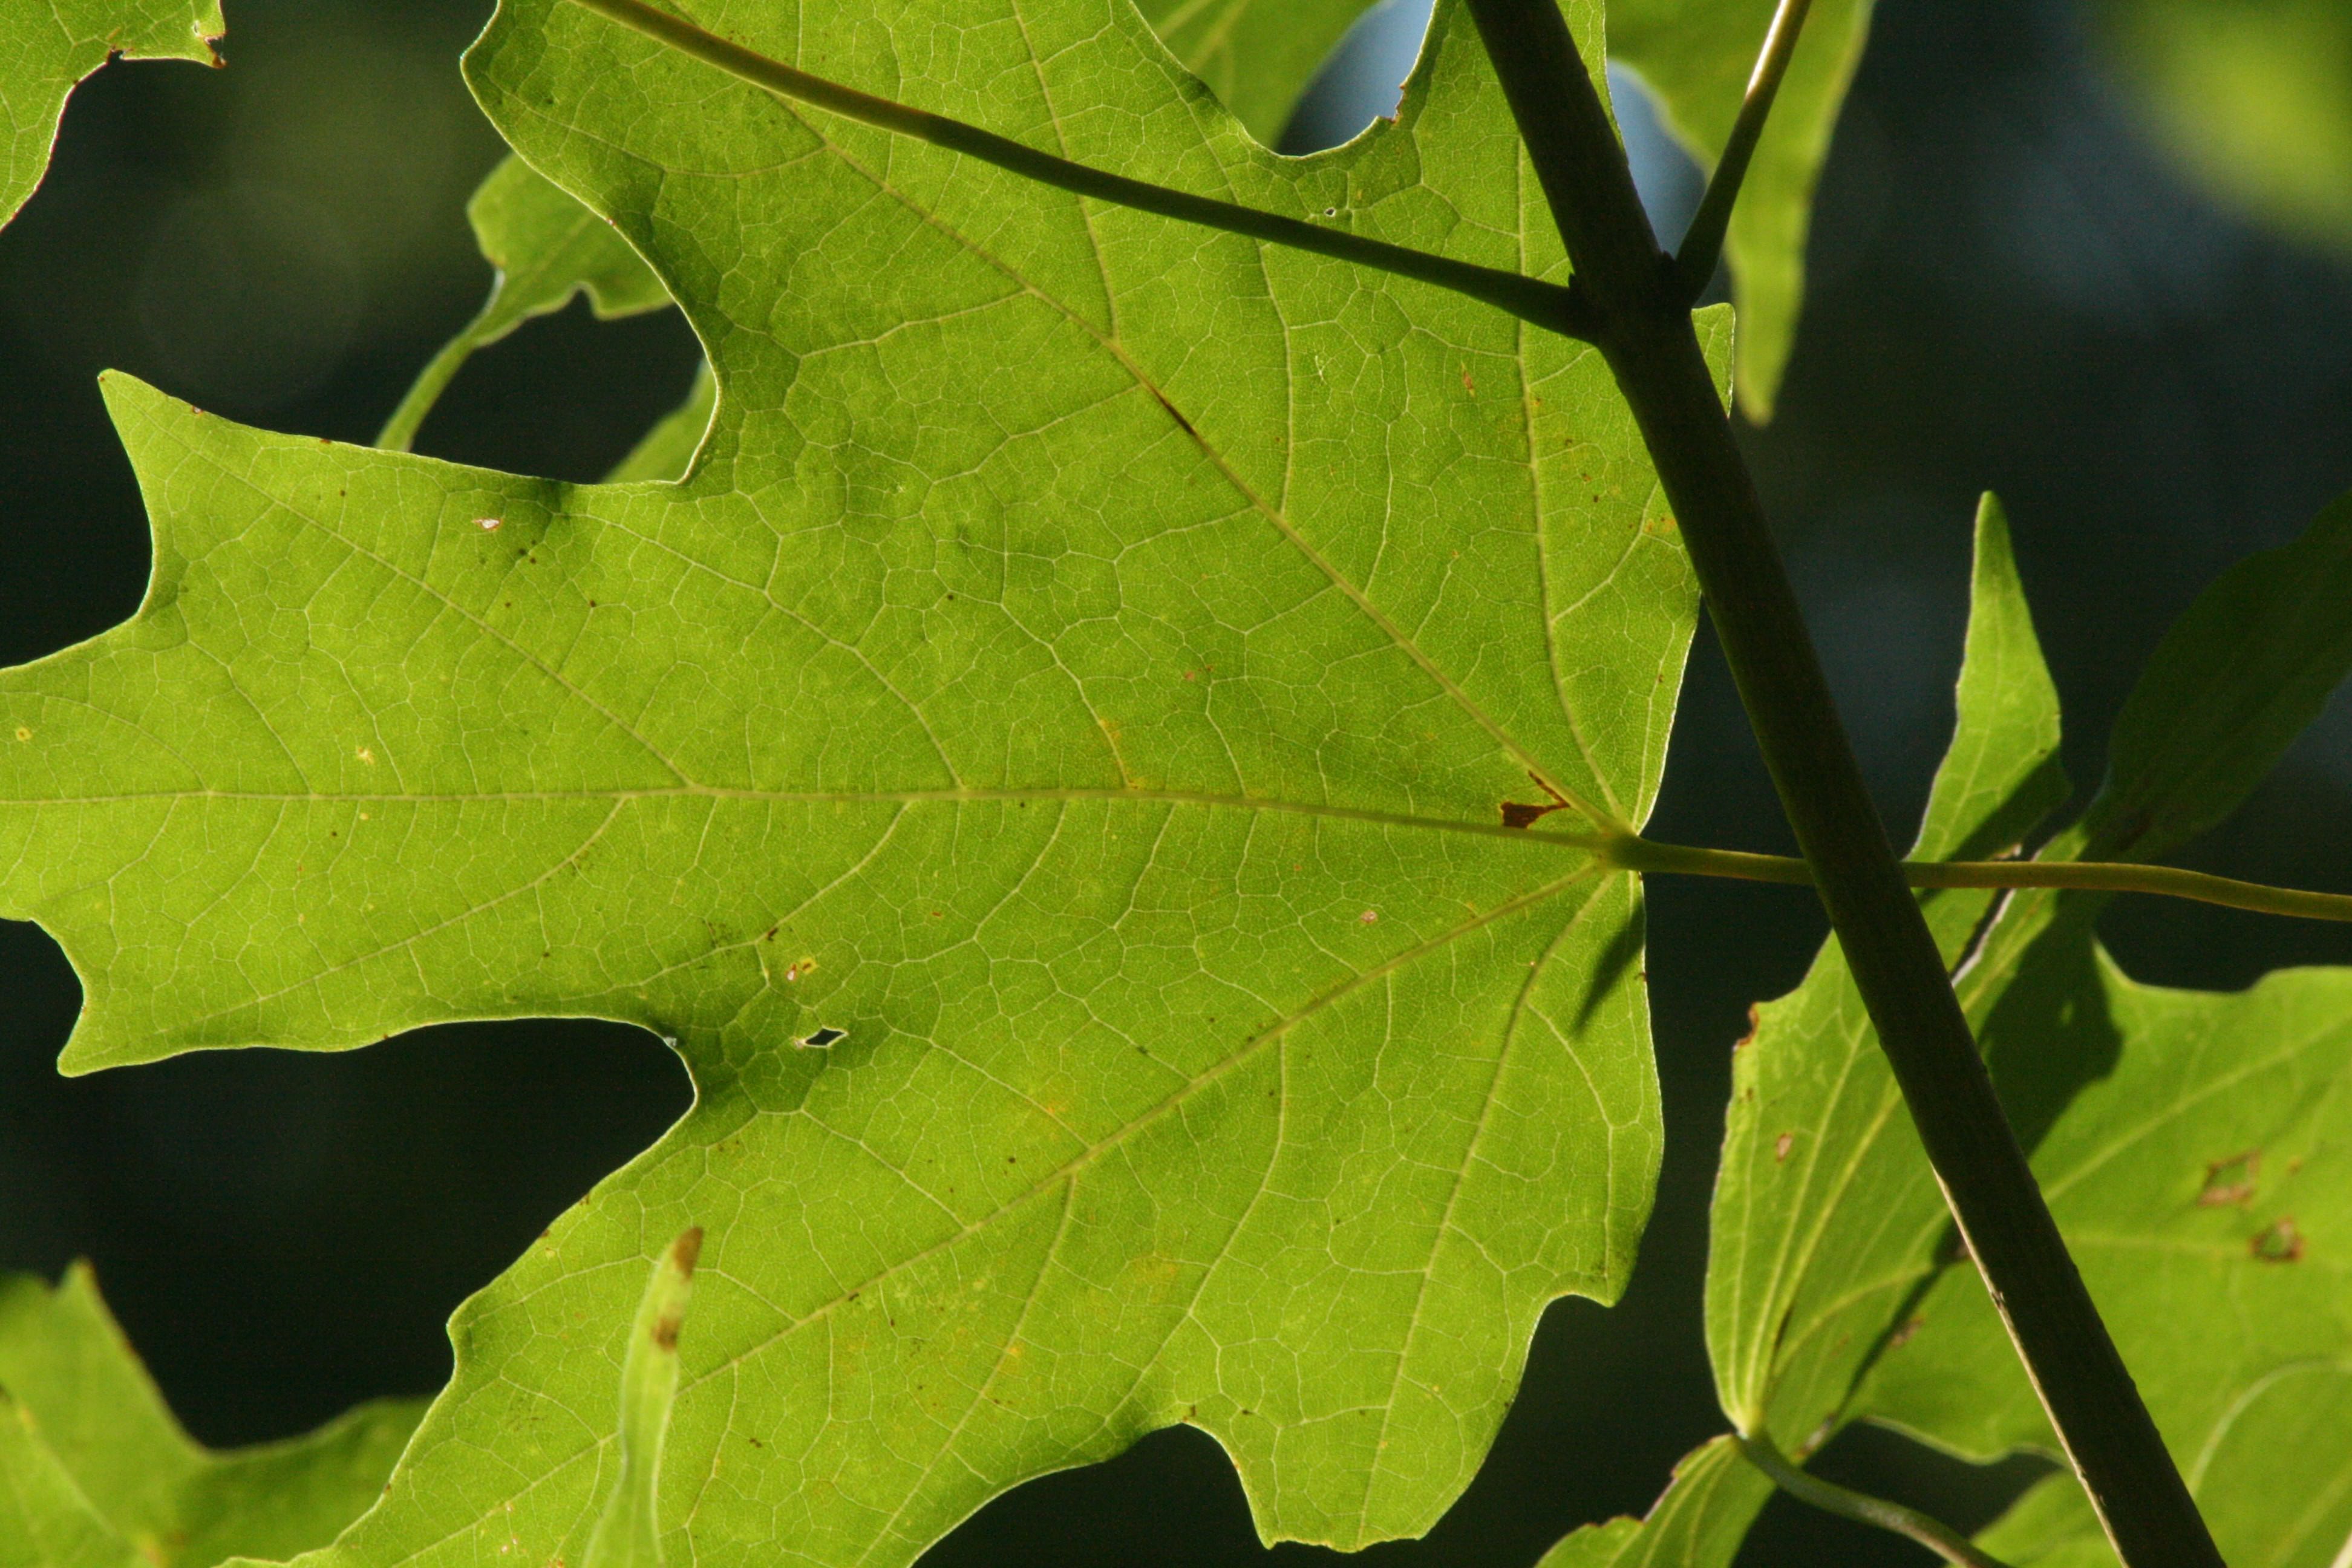 High Resolution Leaf Texture For Free 